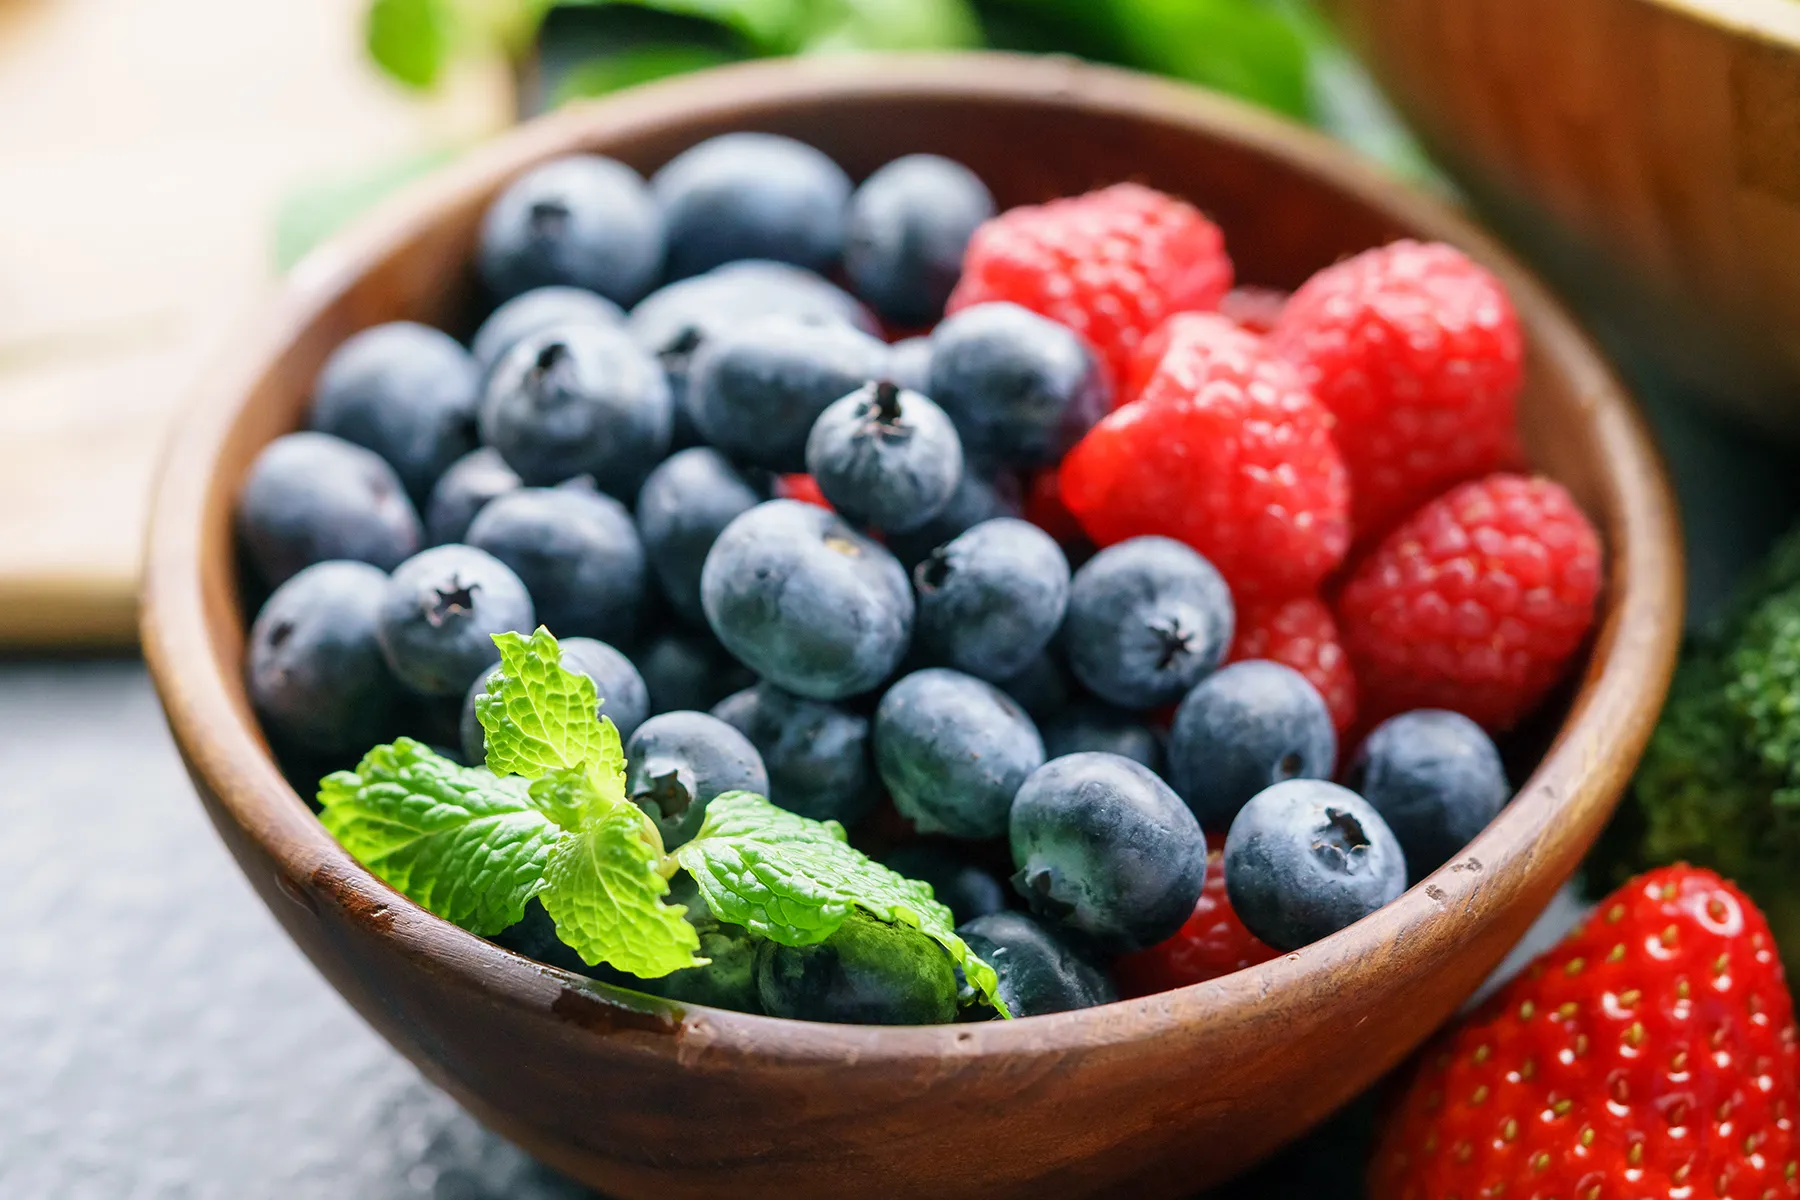 More Berries, Red Wine in Diet Might Slow Parkinson's